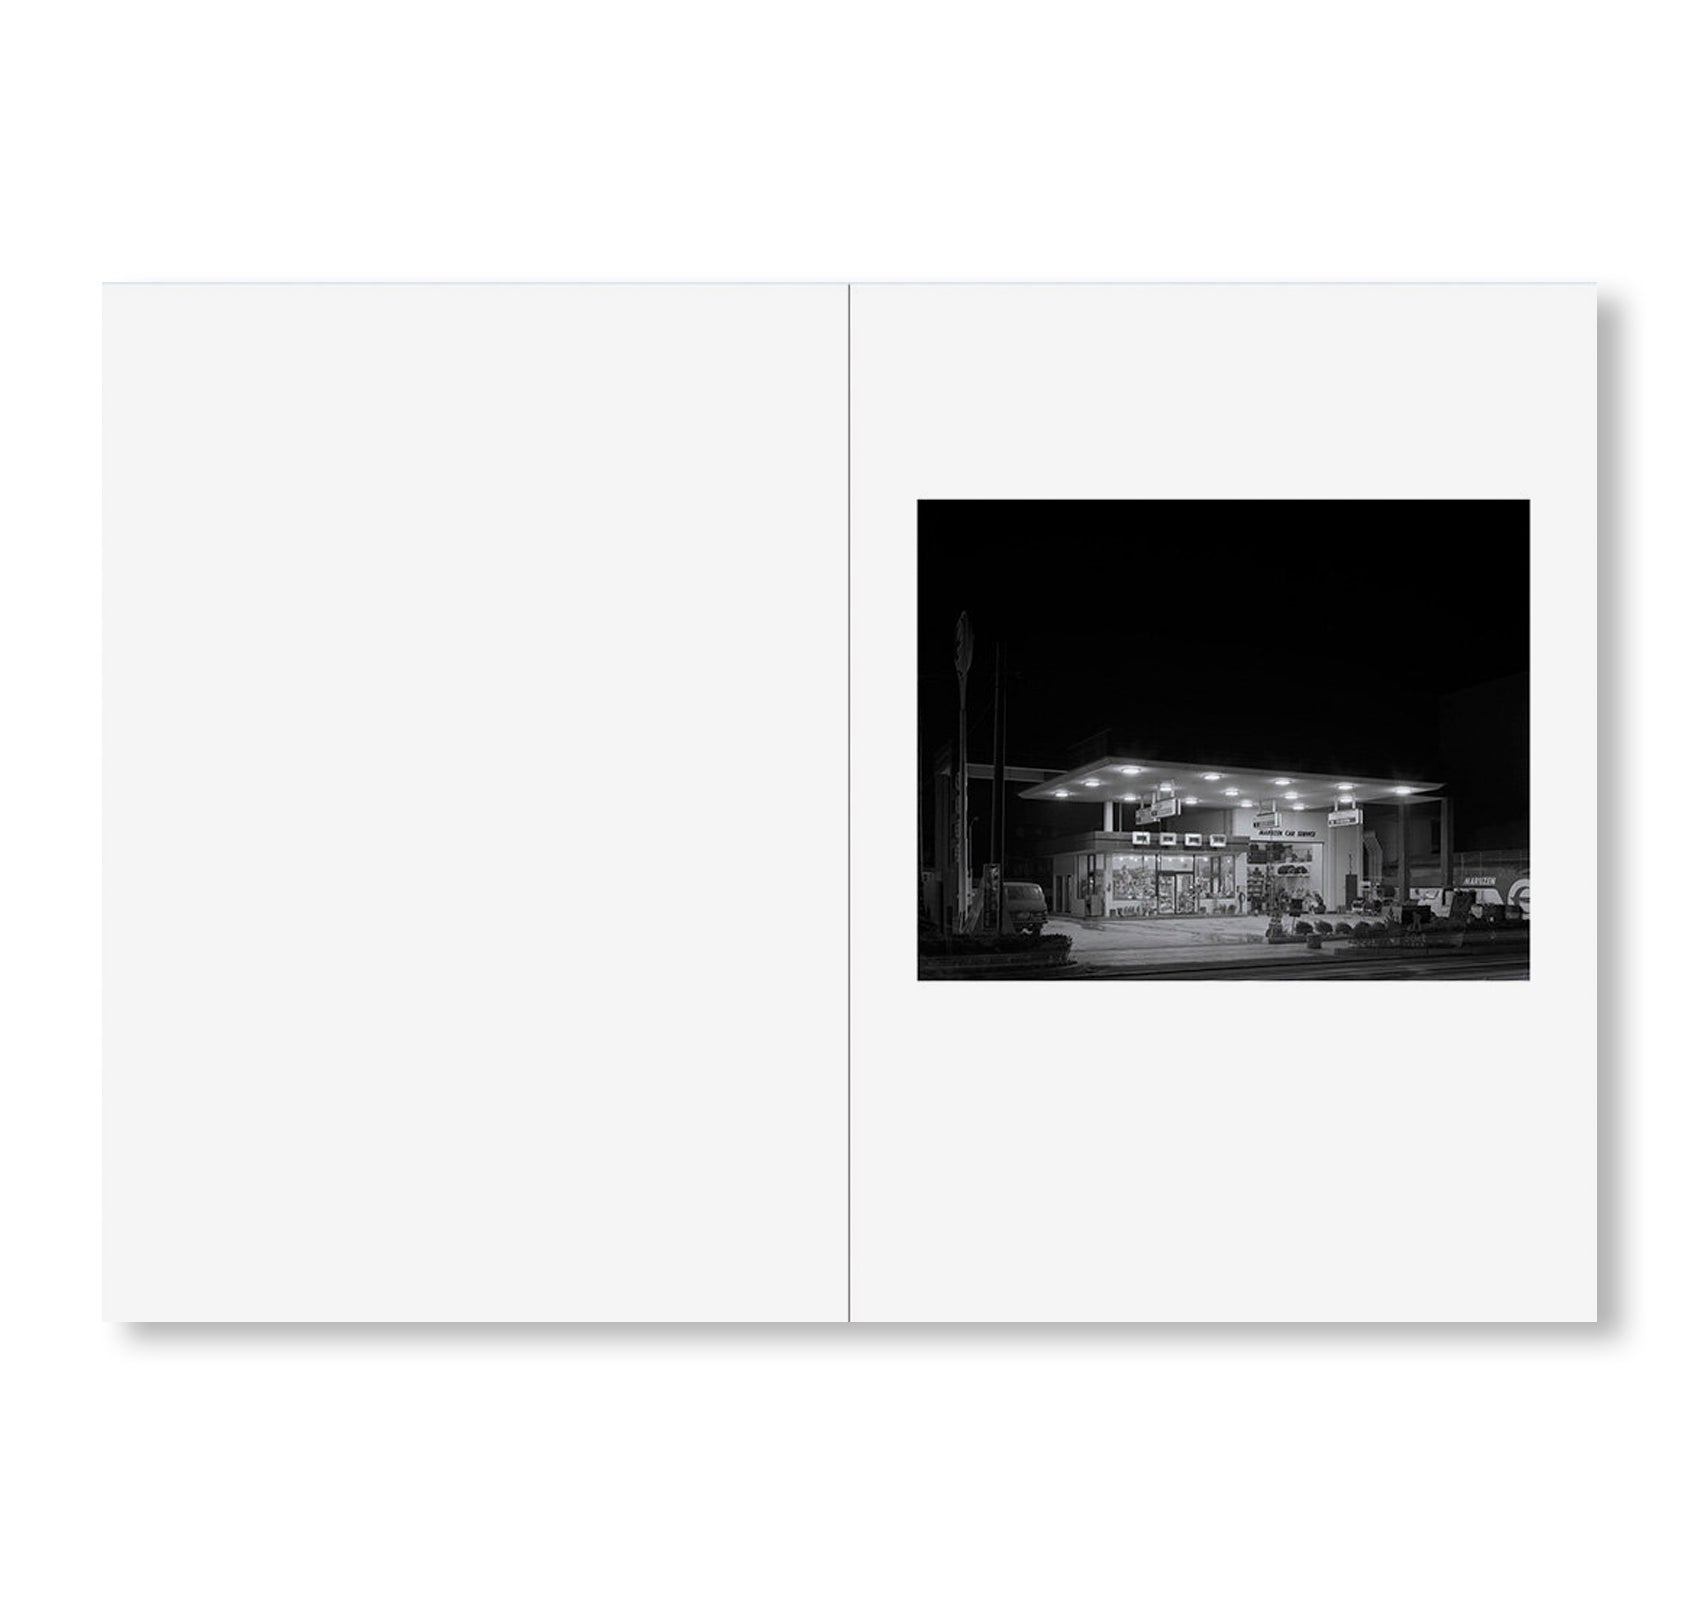 ONE PICTURE BOOK TWO #13: GAS STATIONS by Toshio Shibata